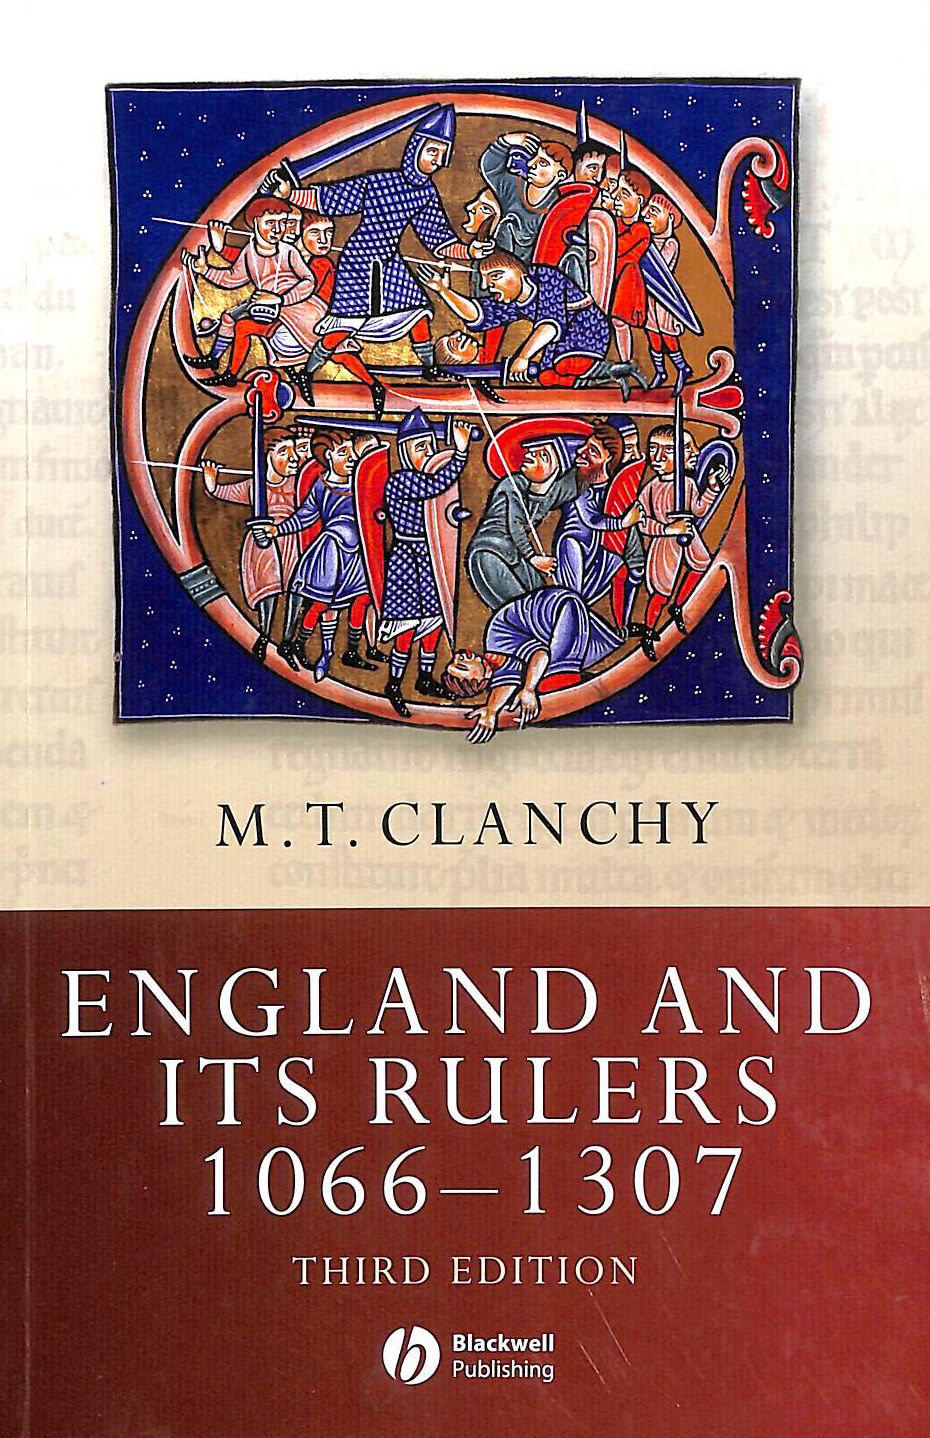 CLANCHY, M. T. - Clanchy England and its Rulers: 1066-1307 (Blackwell Classic Histories of England)